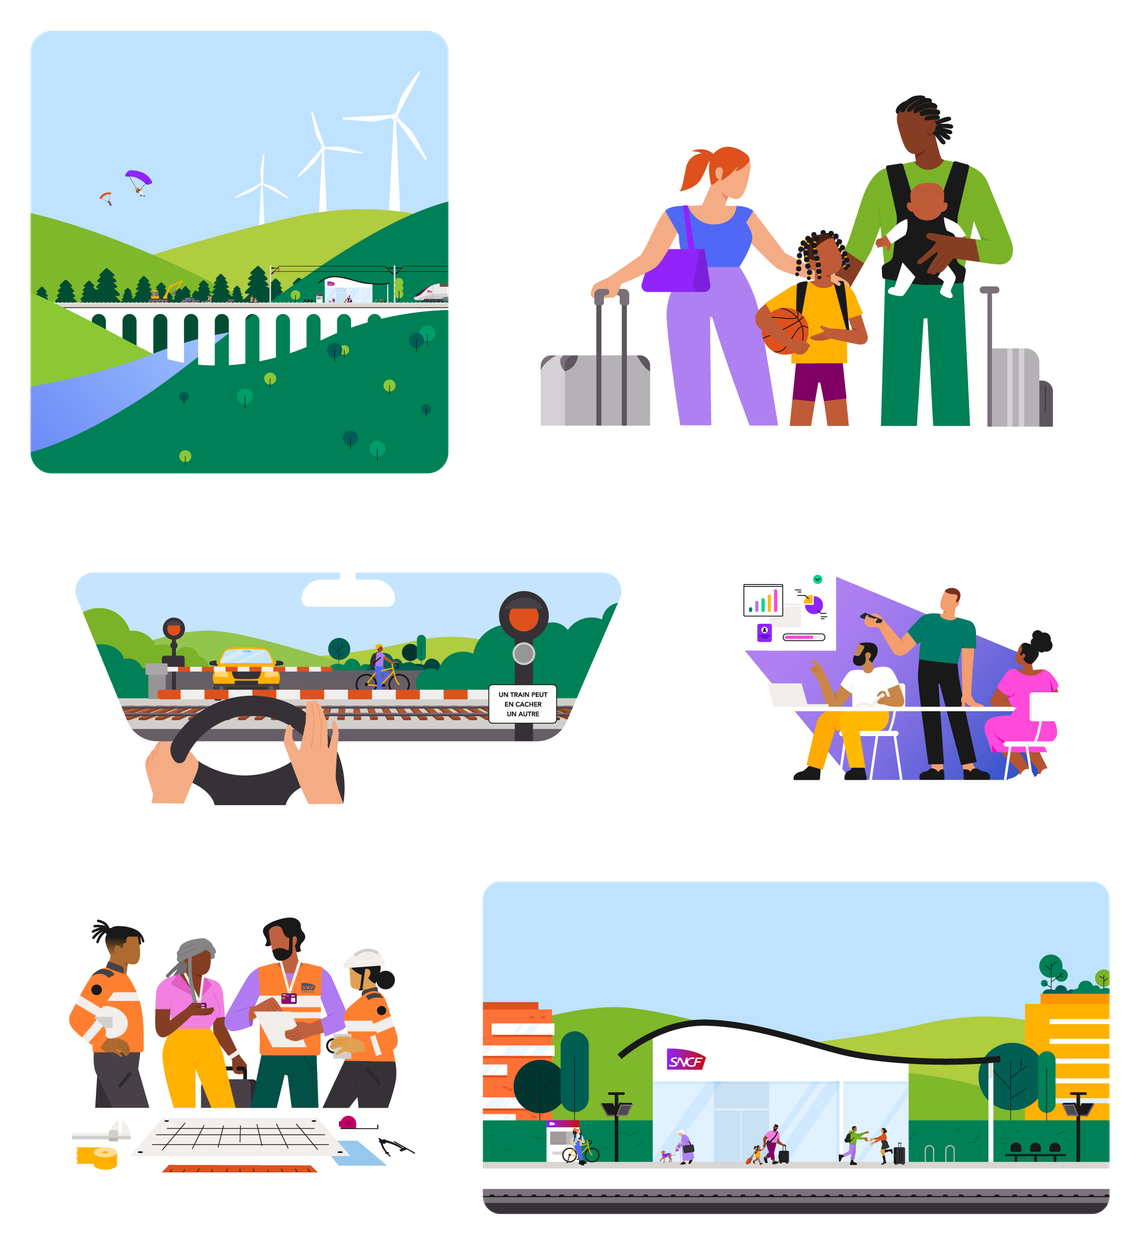 A panel of illustrations created for SNCF Réseau. Characters and scenery are represented in vivid colors.